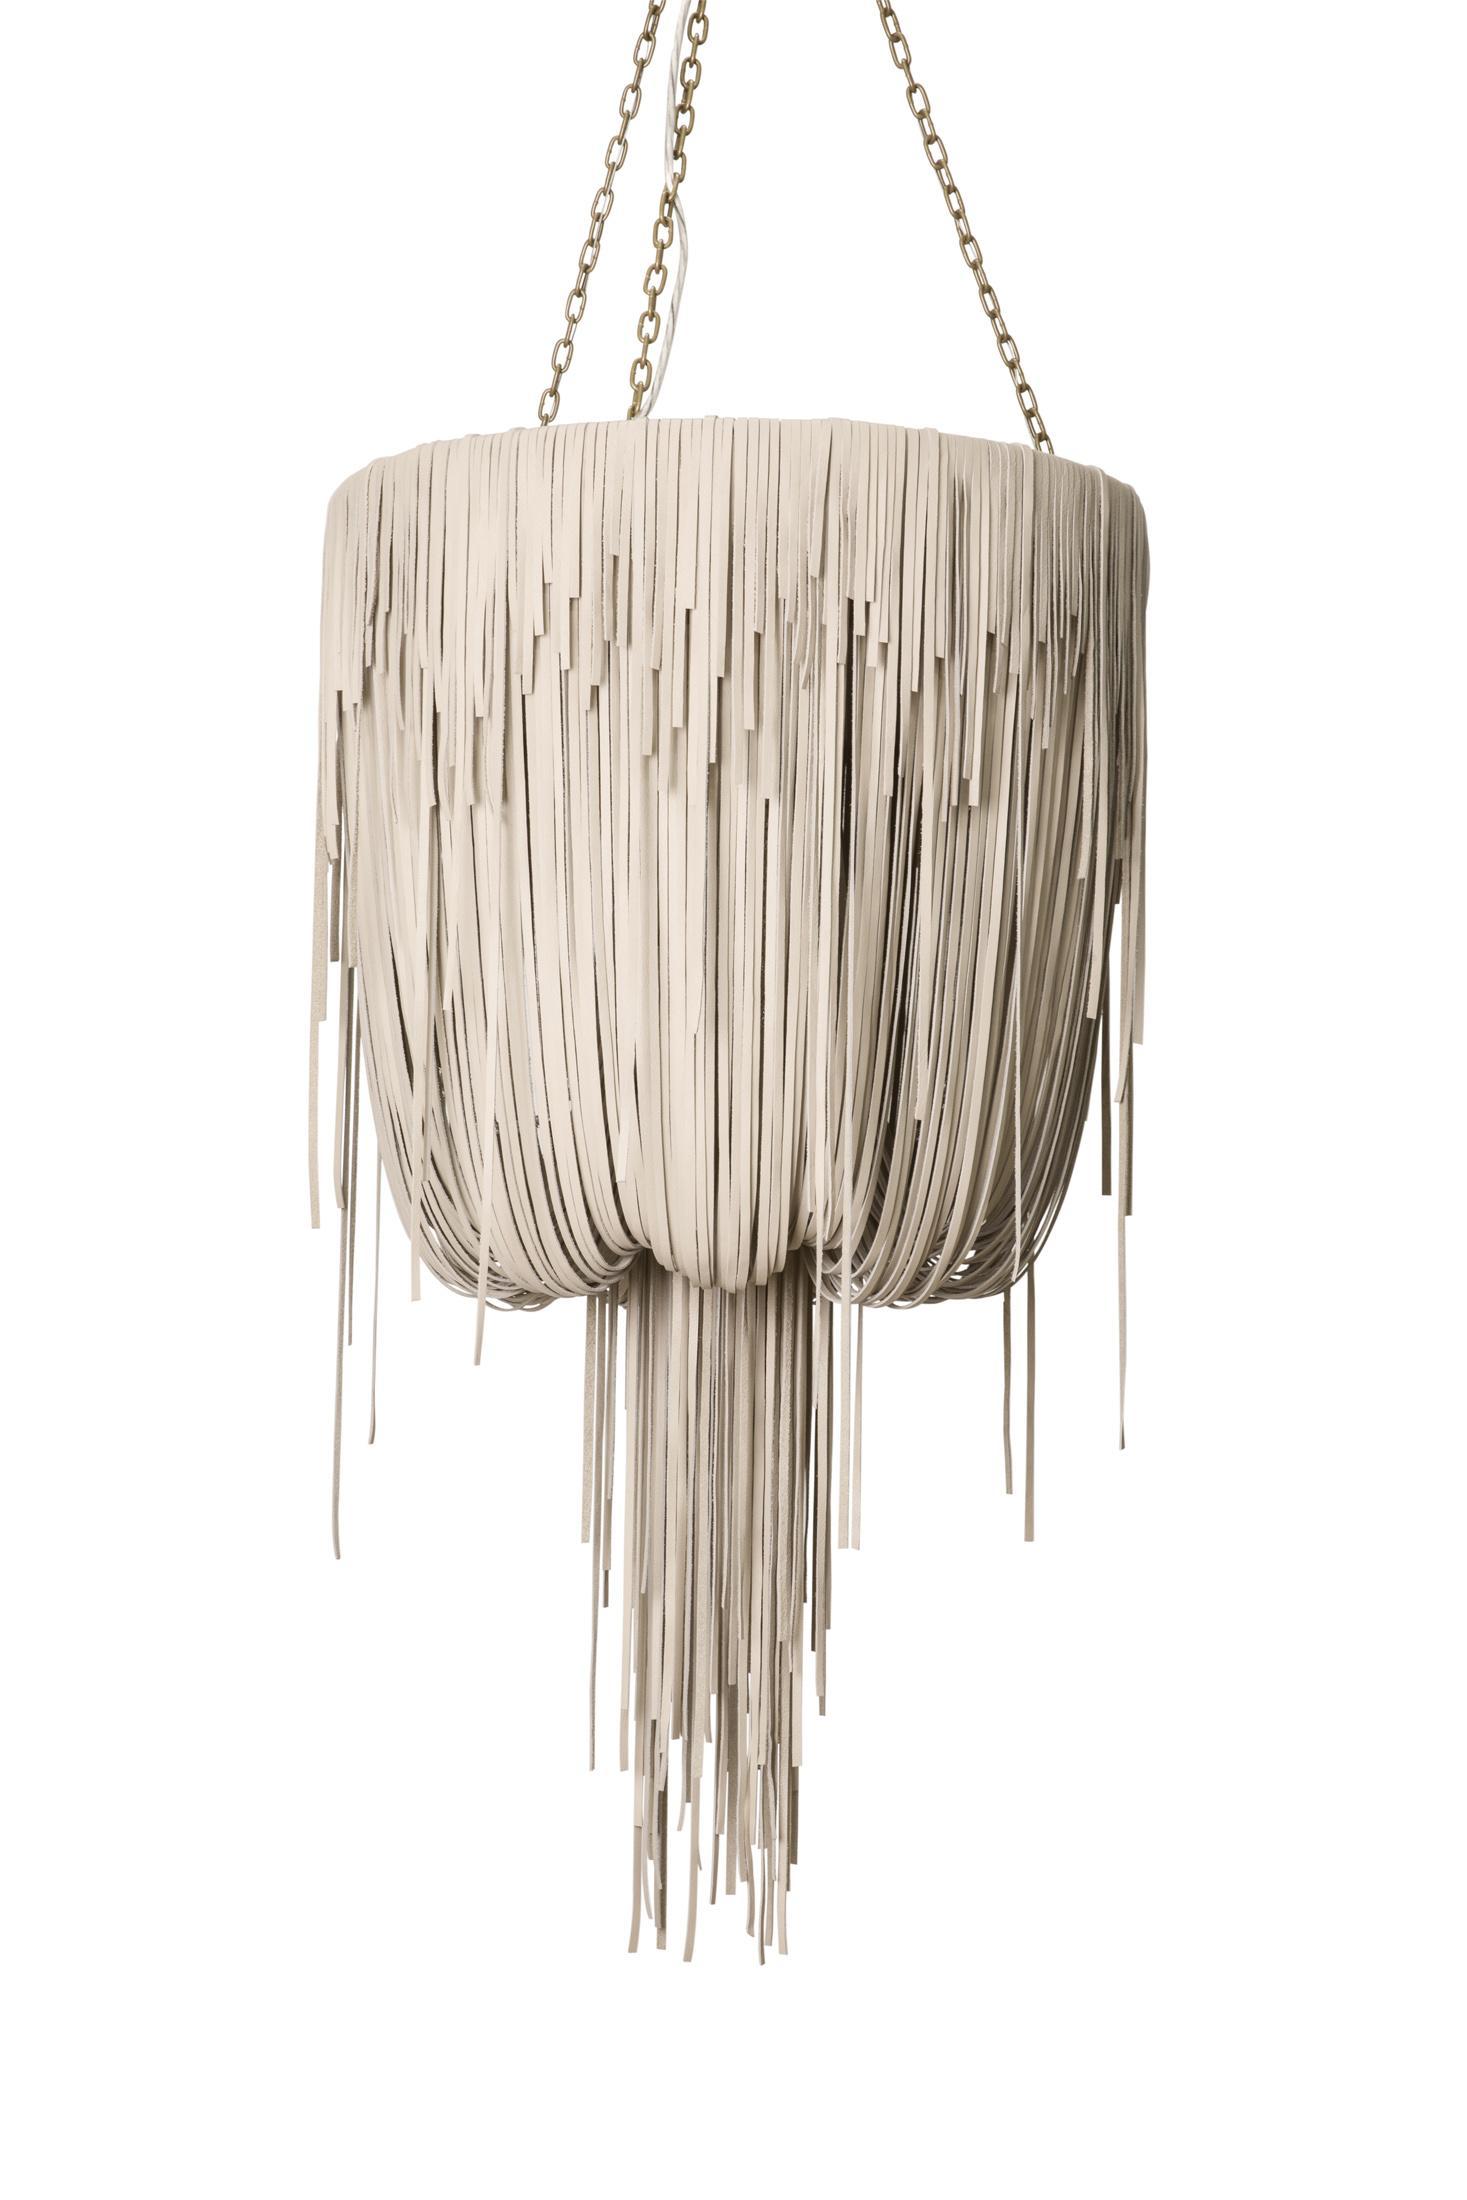 Small Round Urchin Leather Chandelier in Cream-Stone Leather